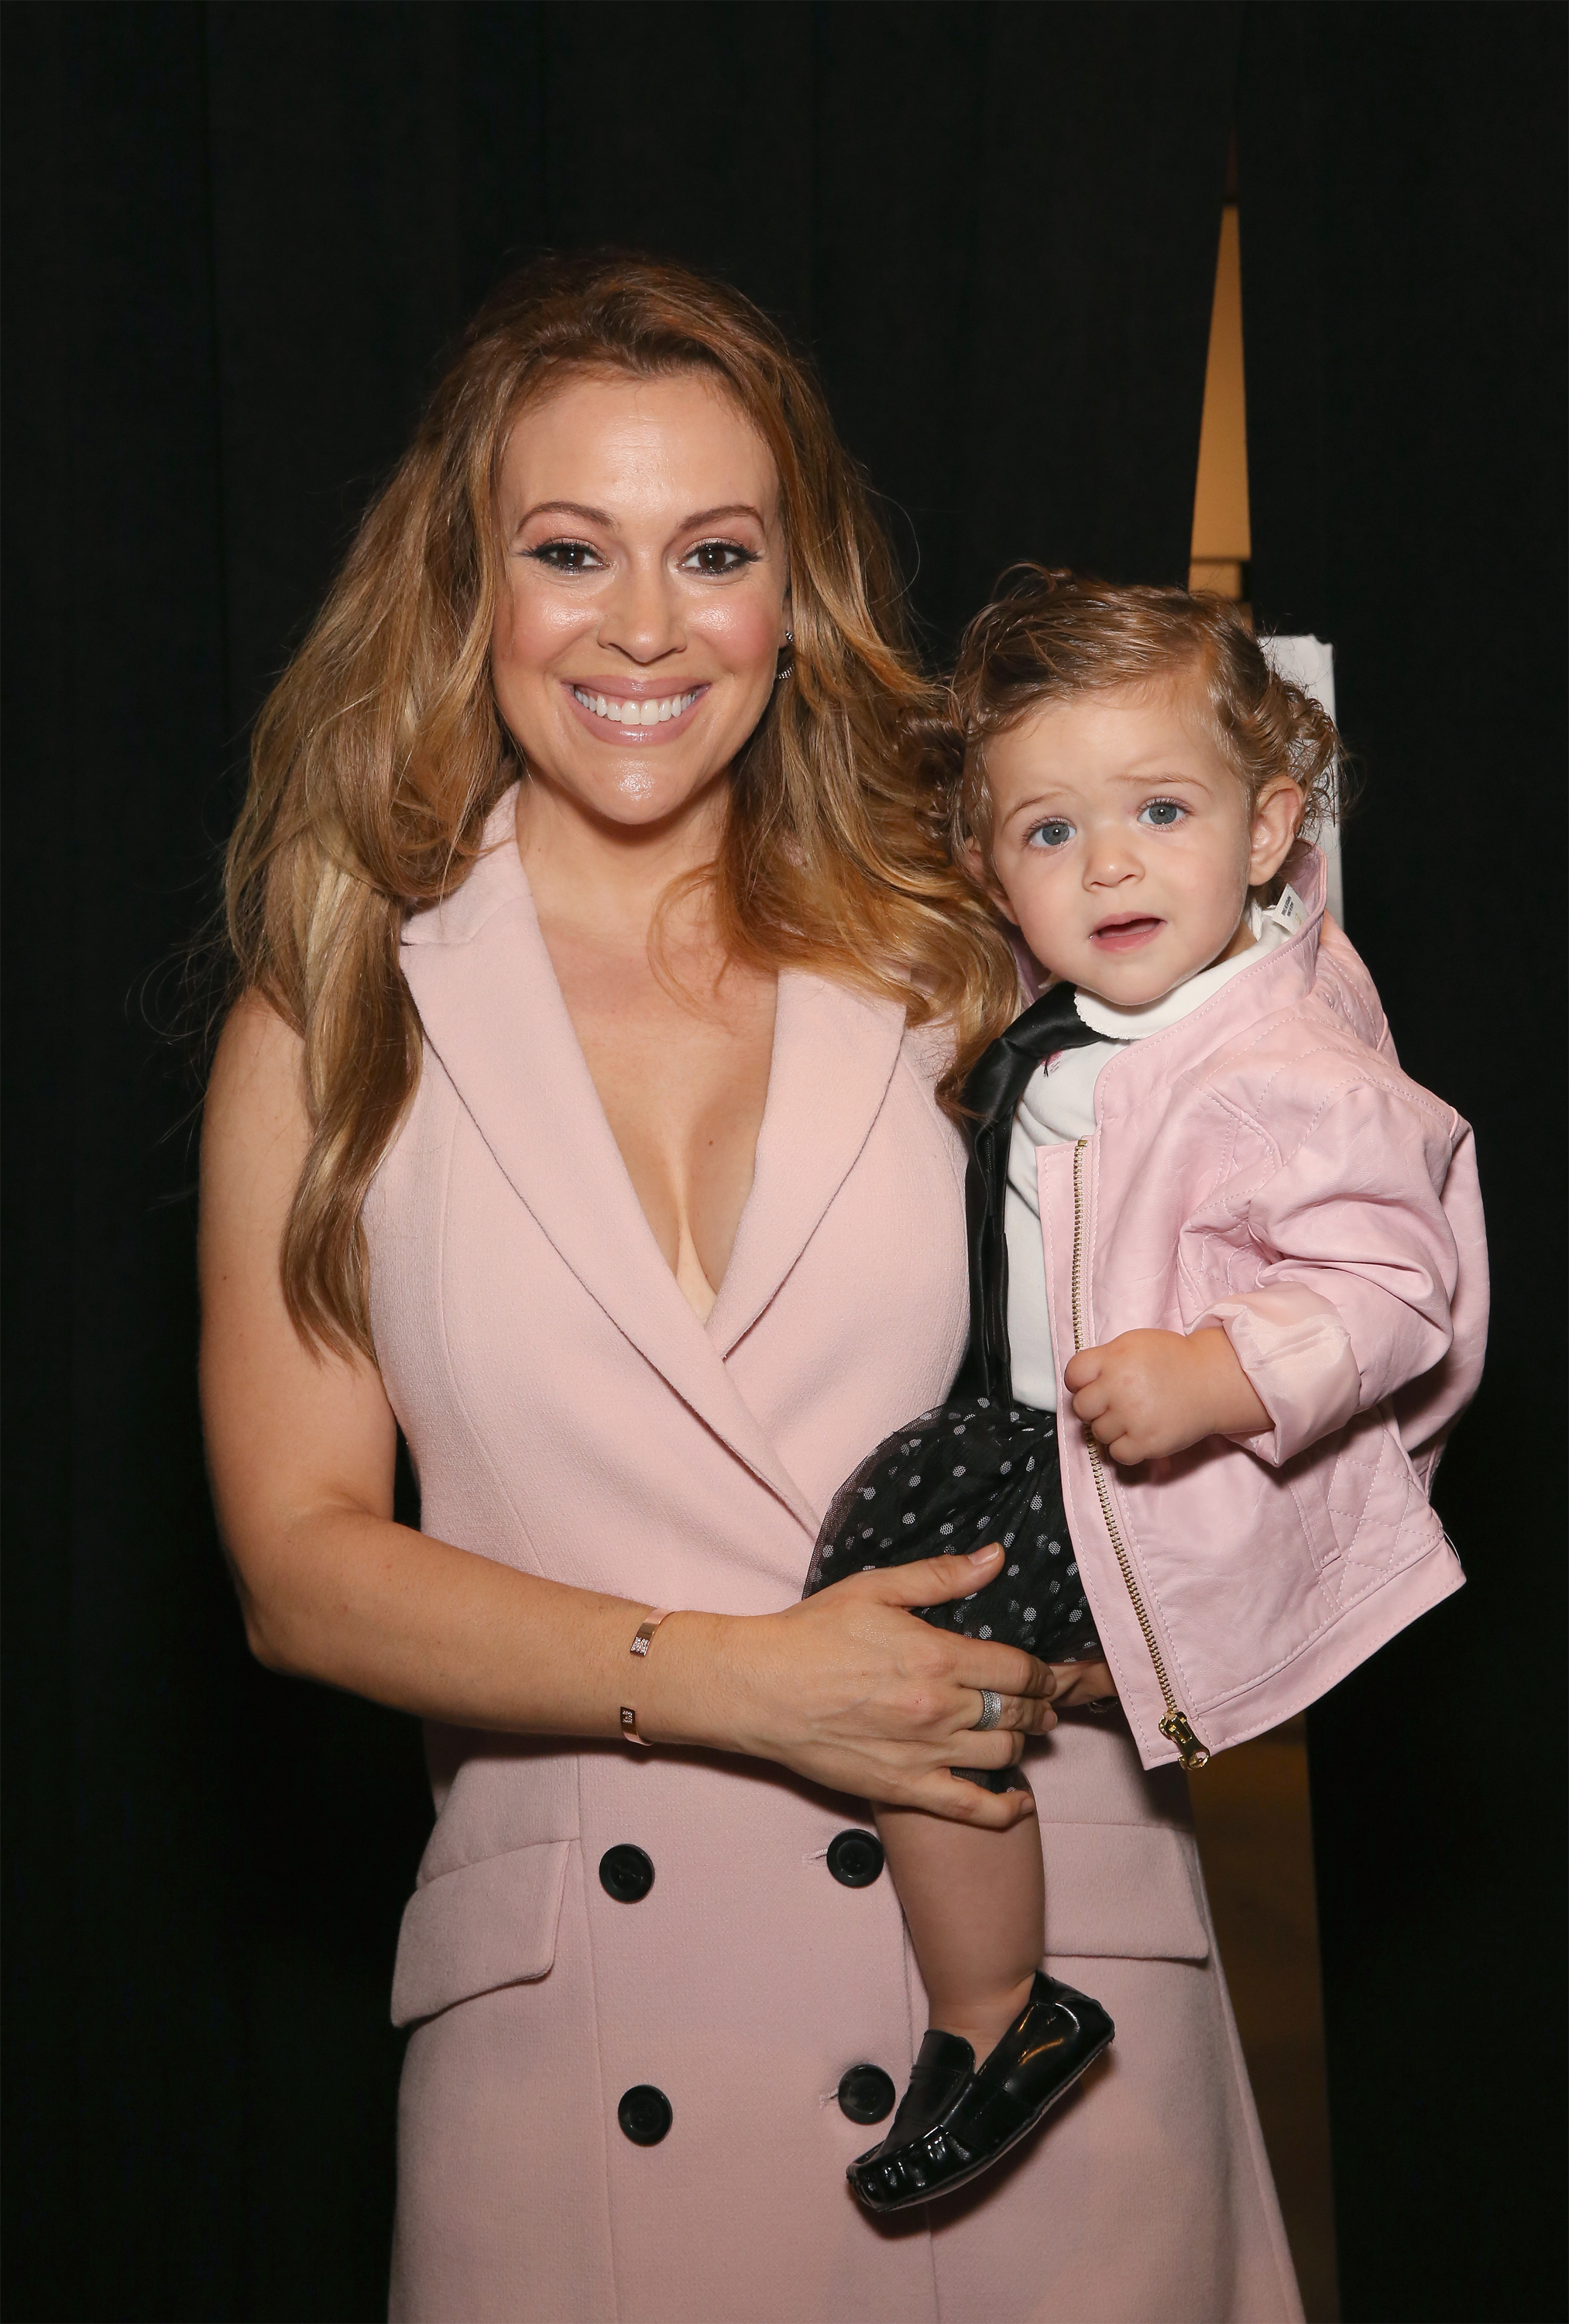 Alyssa Milano and her daughter Elizabella pose backstage before the Marissa Webb Fashion Show during Spring MADE Fashion Week on September 10, 2015, in New York City | Source: Getty Images